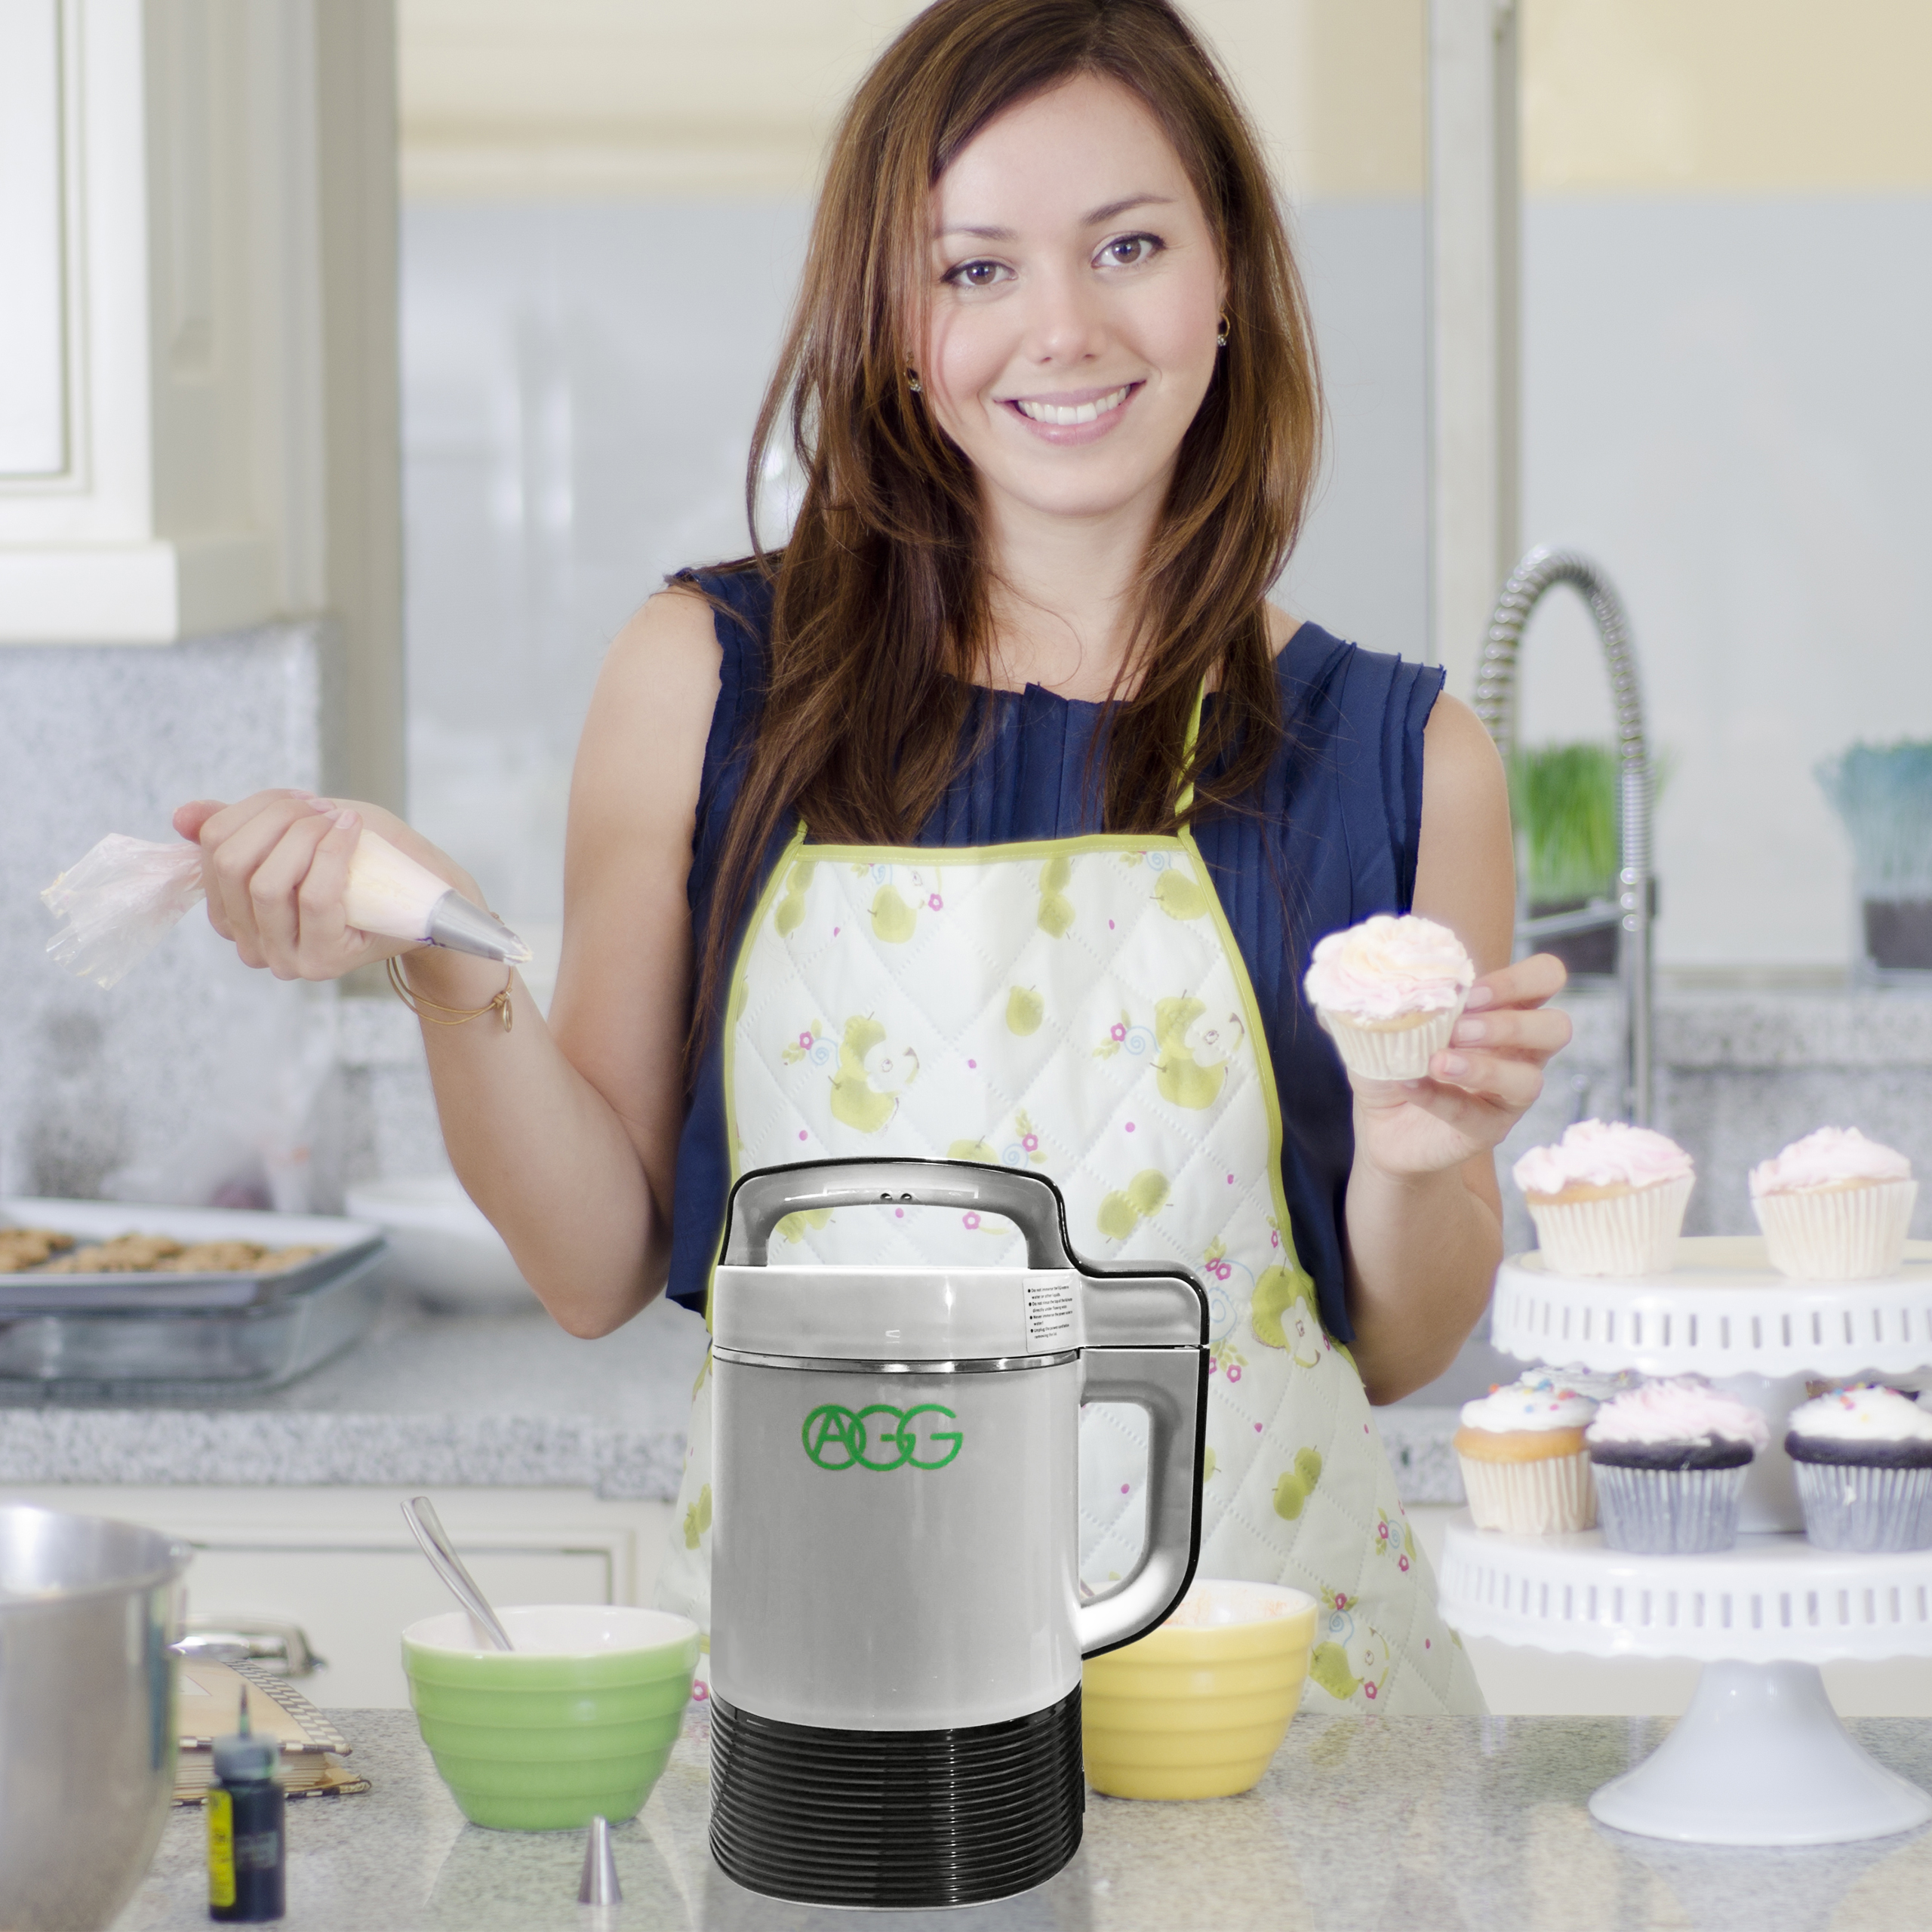 Electric Herbal Infuser: Infuse Butter, Oil & More w/ any Herb - image 1 of 5